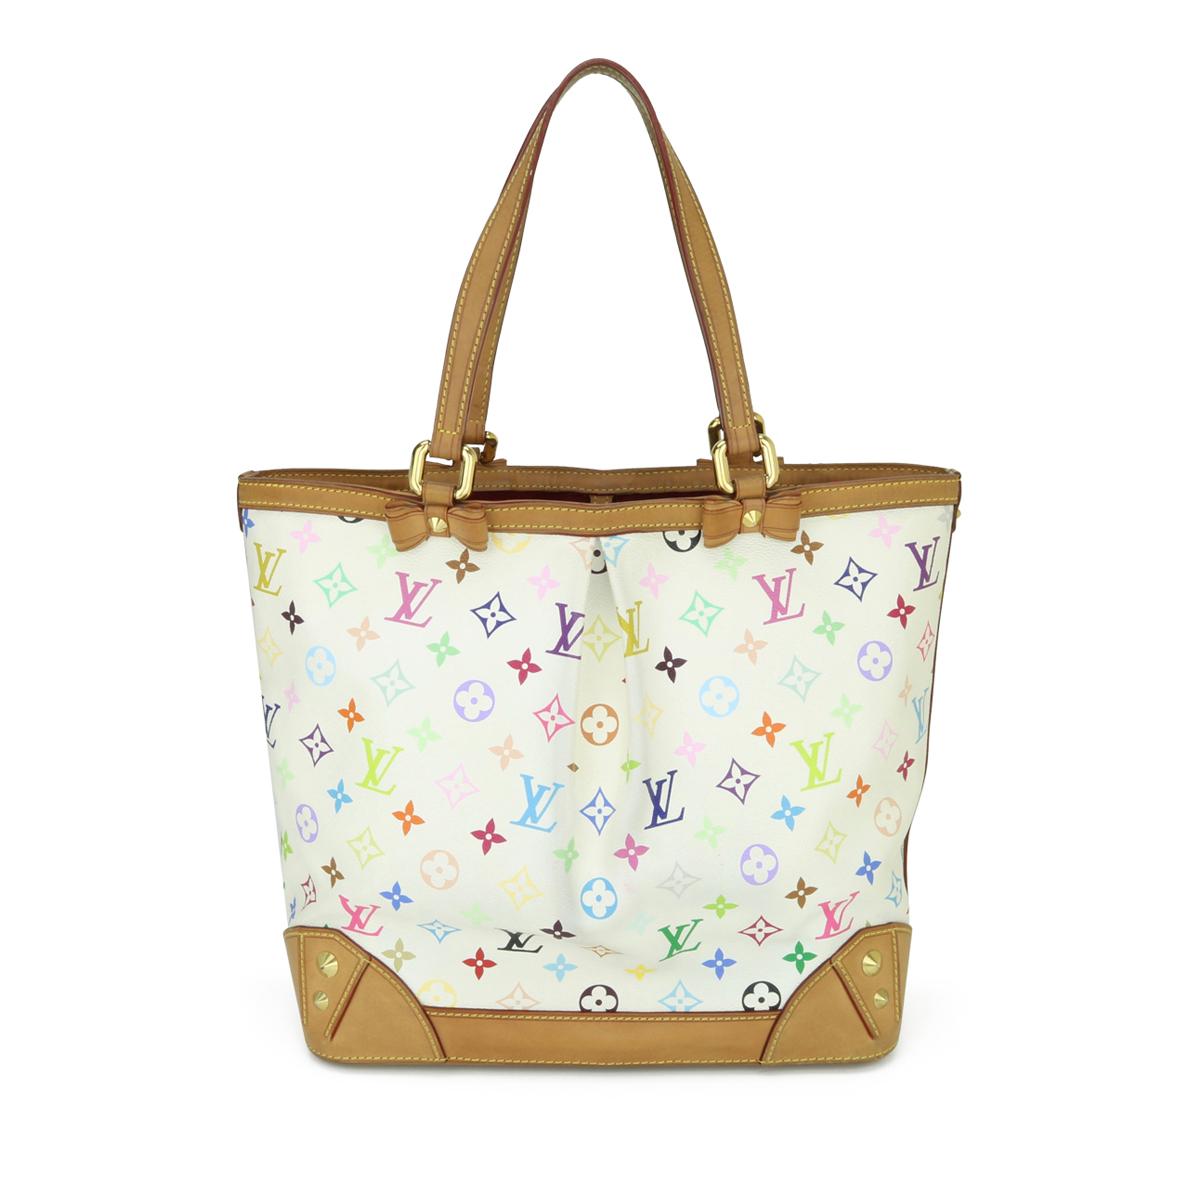 Louis Vuitton Sharleen MM Tote Bag in White Multicolore Monogram 2011.

This bag is in good condition. 

- Exterior Condition: Good condition. Rubbing to four base corners. Marking, darkening and leather wear to the vachetta leather. Storage